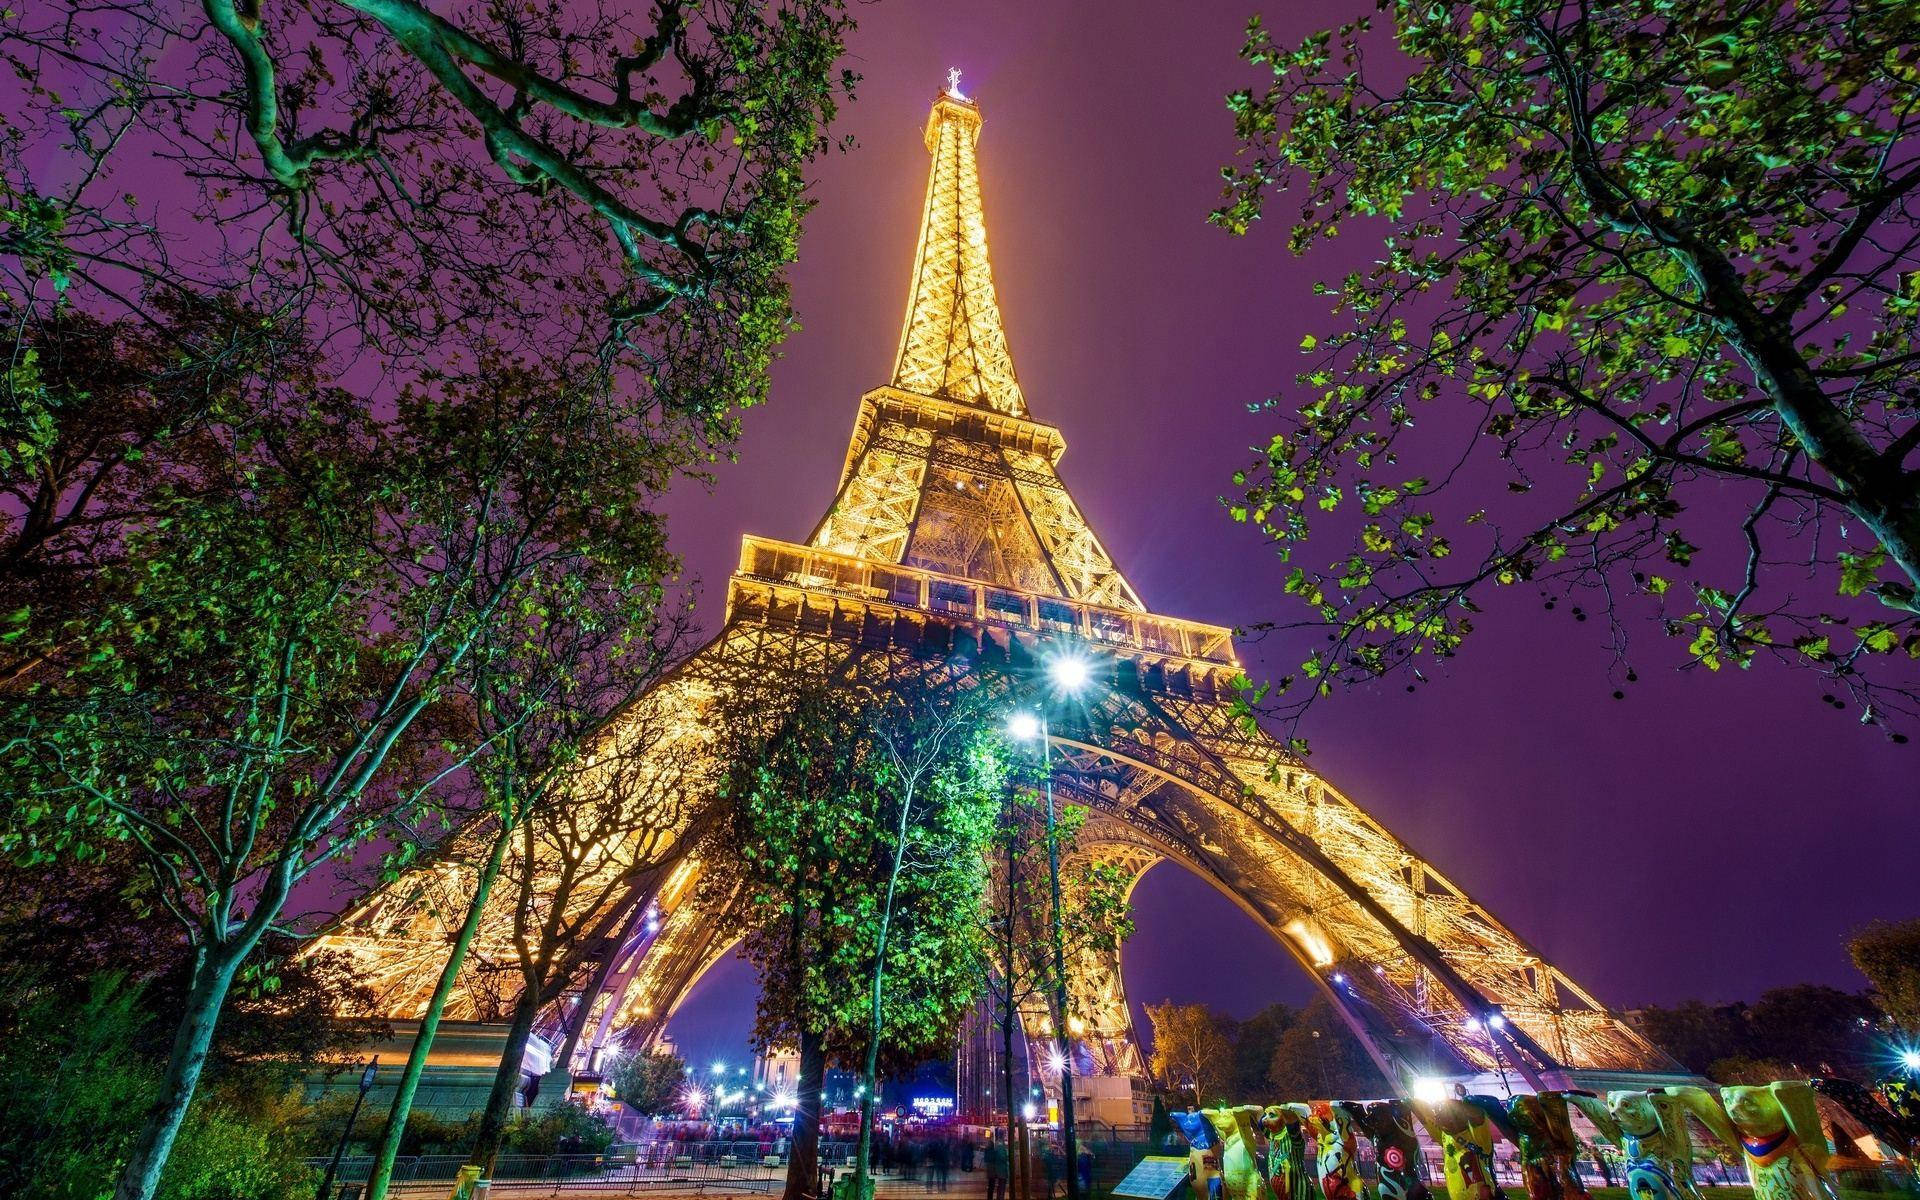 The stunning Eiffel Tower at sunset in Paris, France Wallpaper